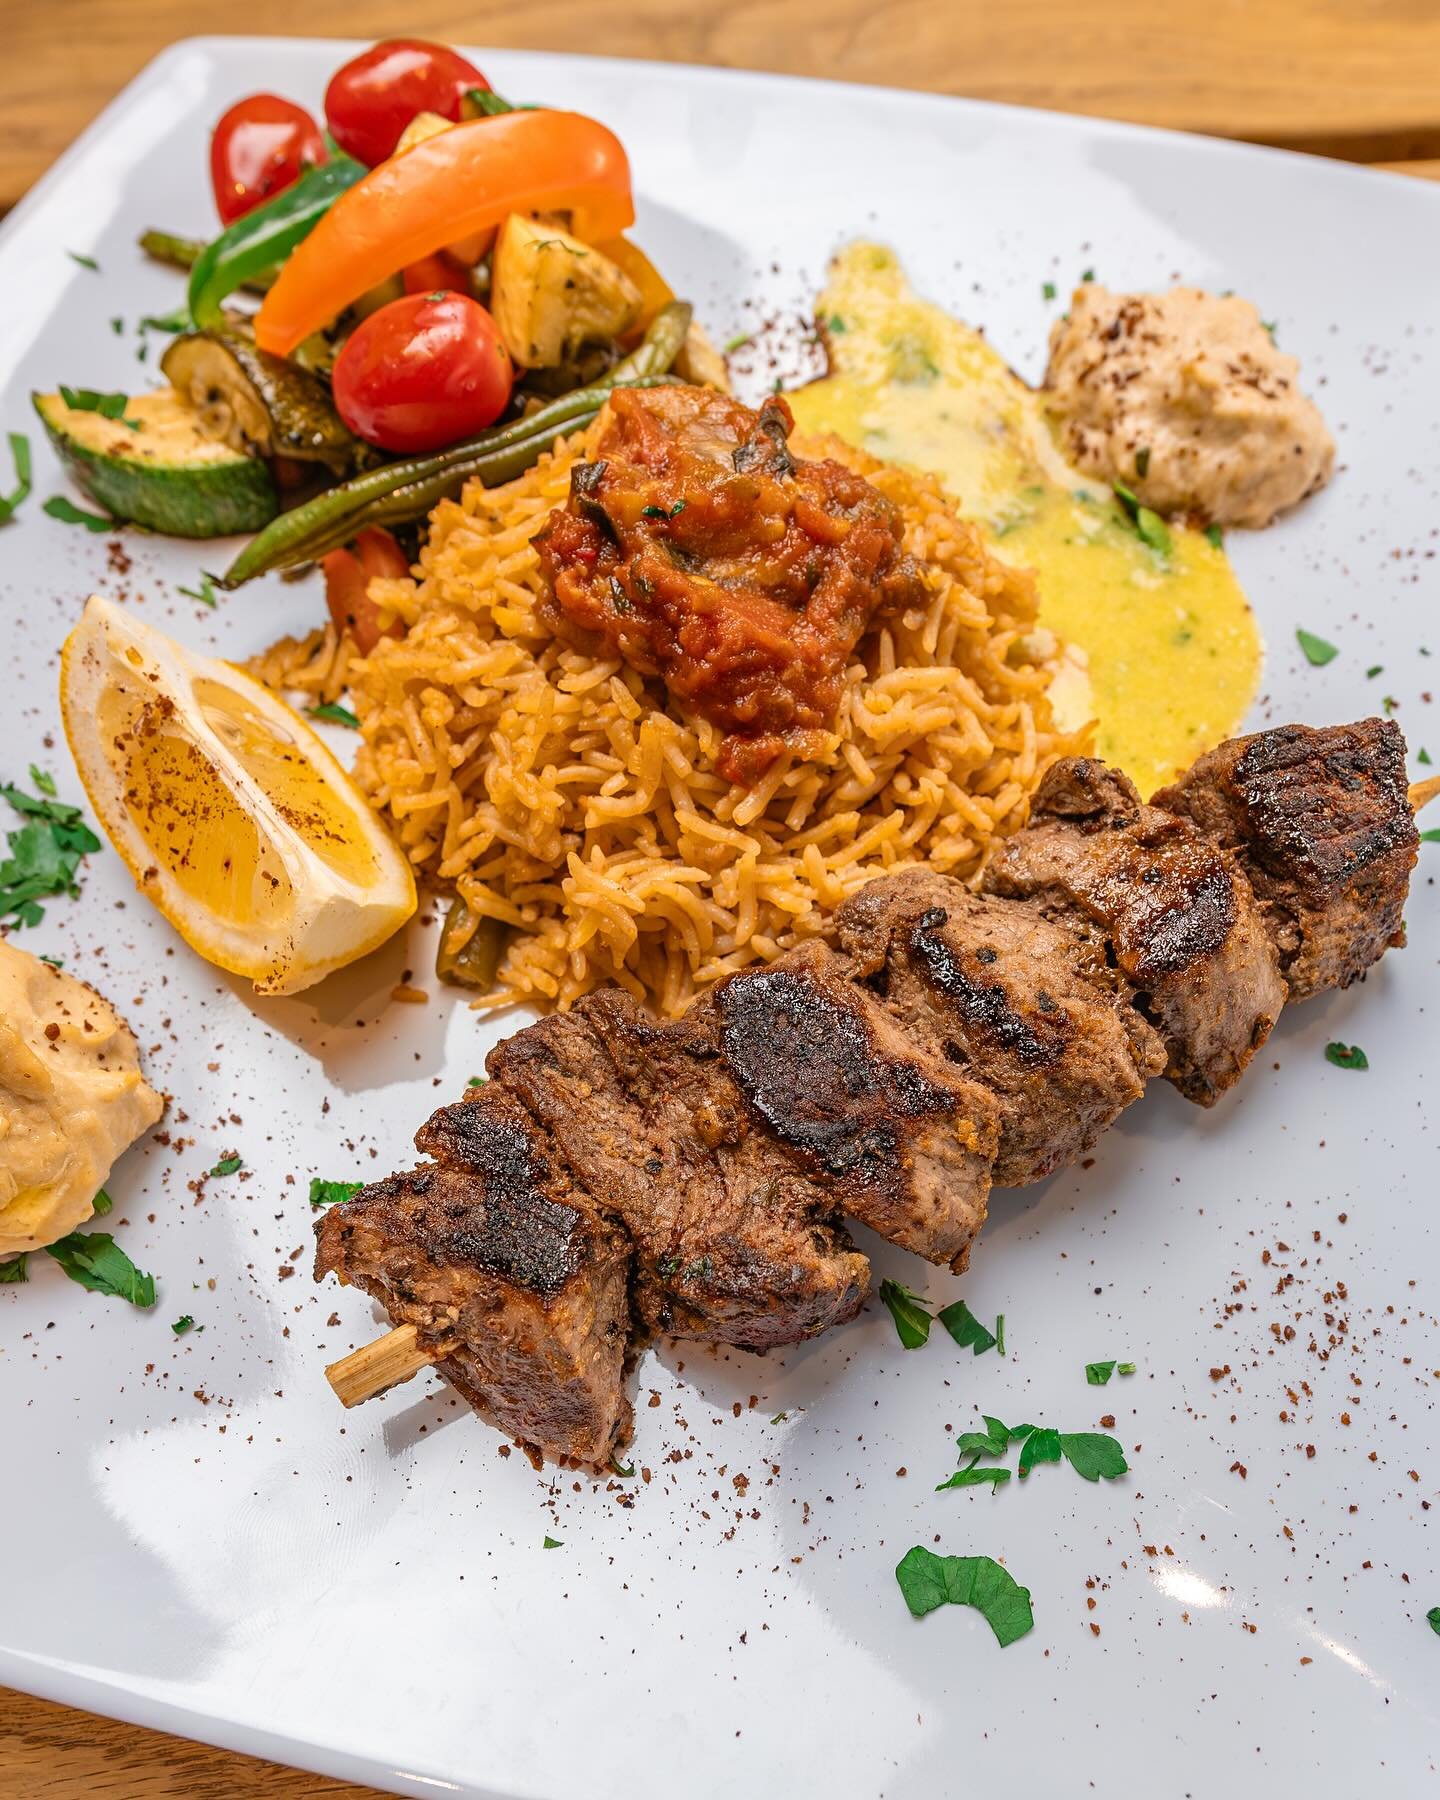 No matter the occasion, Aviva catering will impress every crowd! We offer the freshest Mediterranean dishes that are healthy and delicious. You are sure to impress when you cater from the #1 Yelp and #1 Trip Advisor-rated restaurant in Atlanta.

Clic